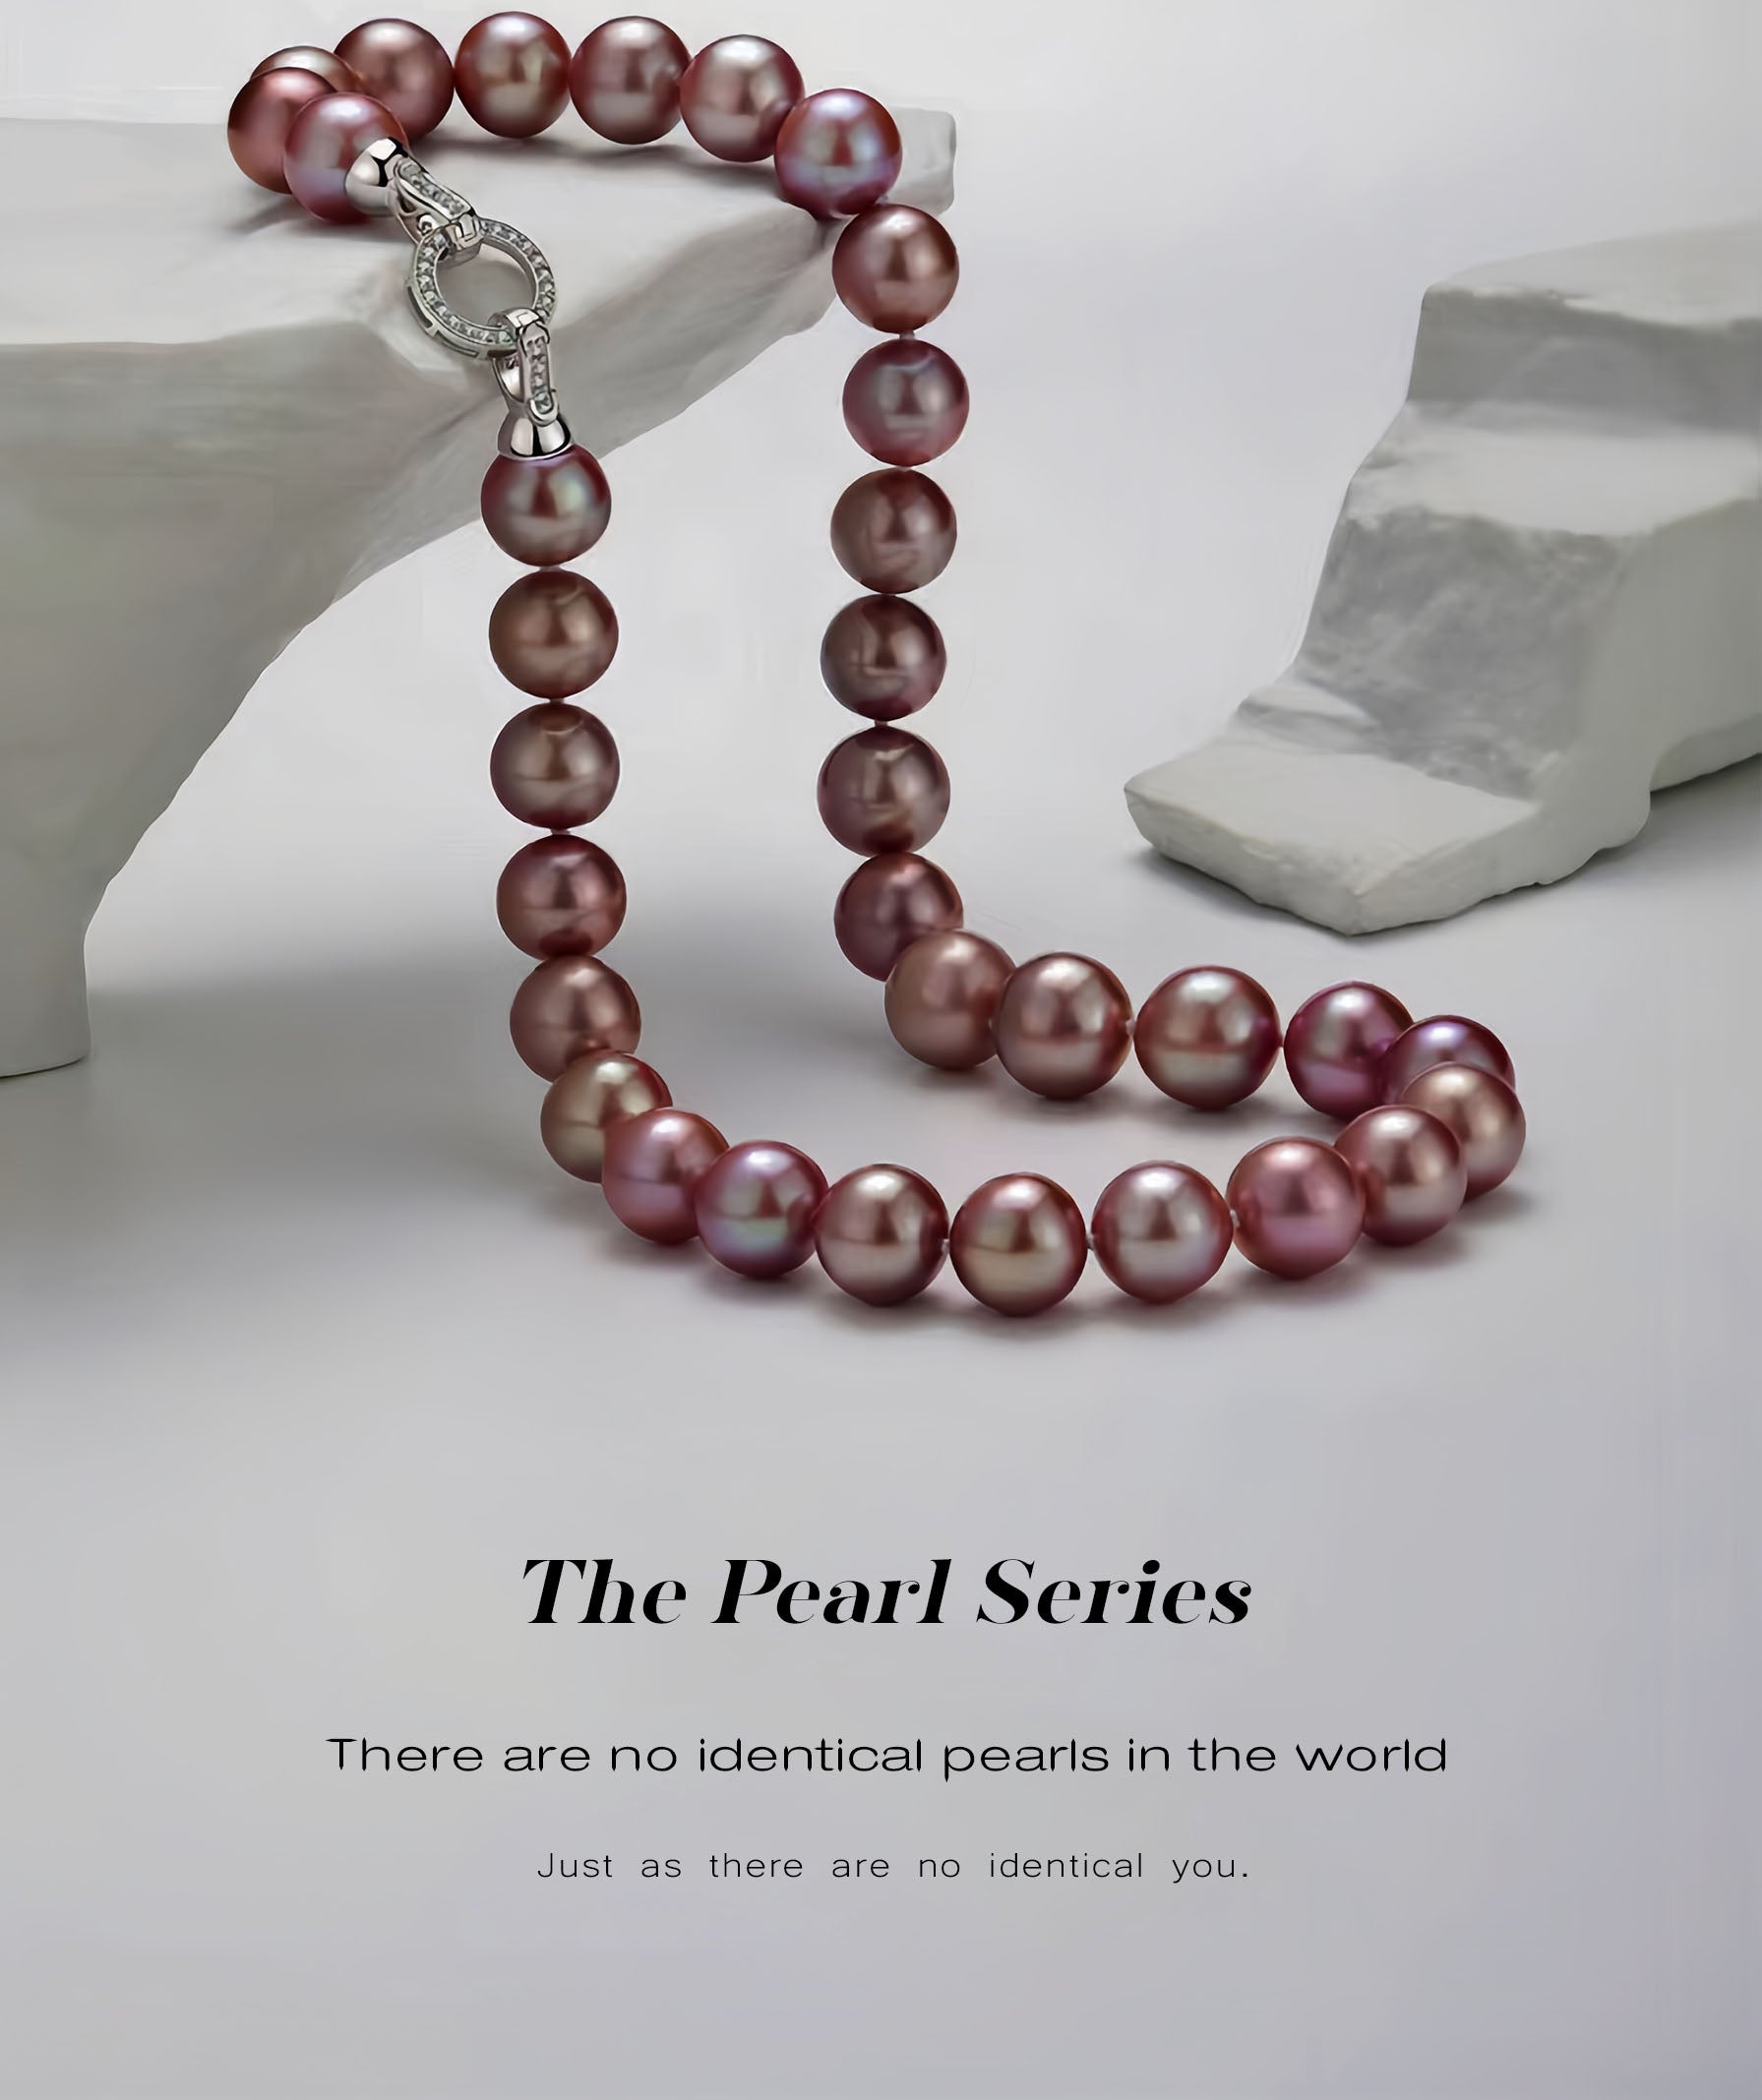 The Pearl Series